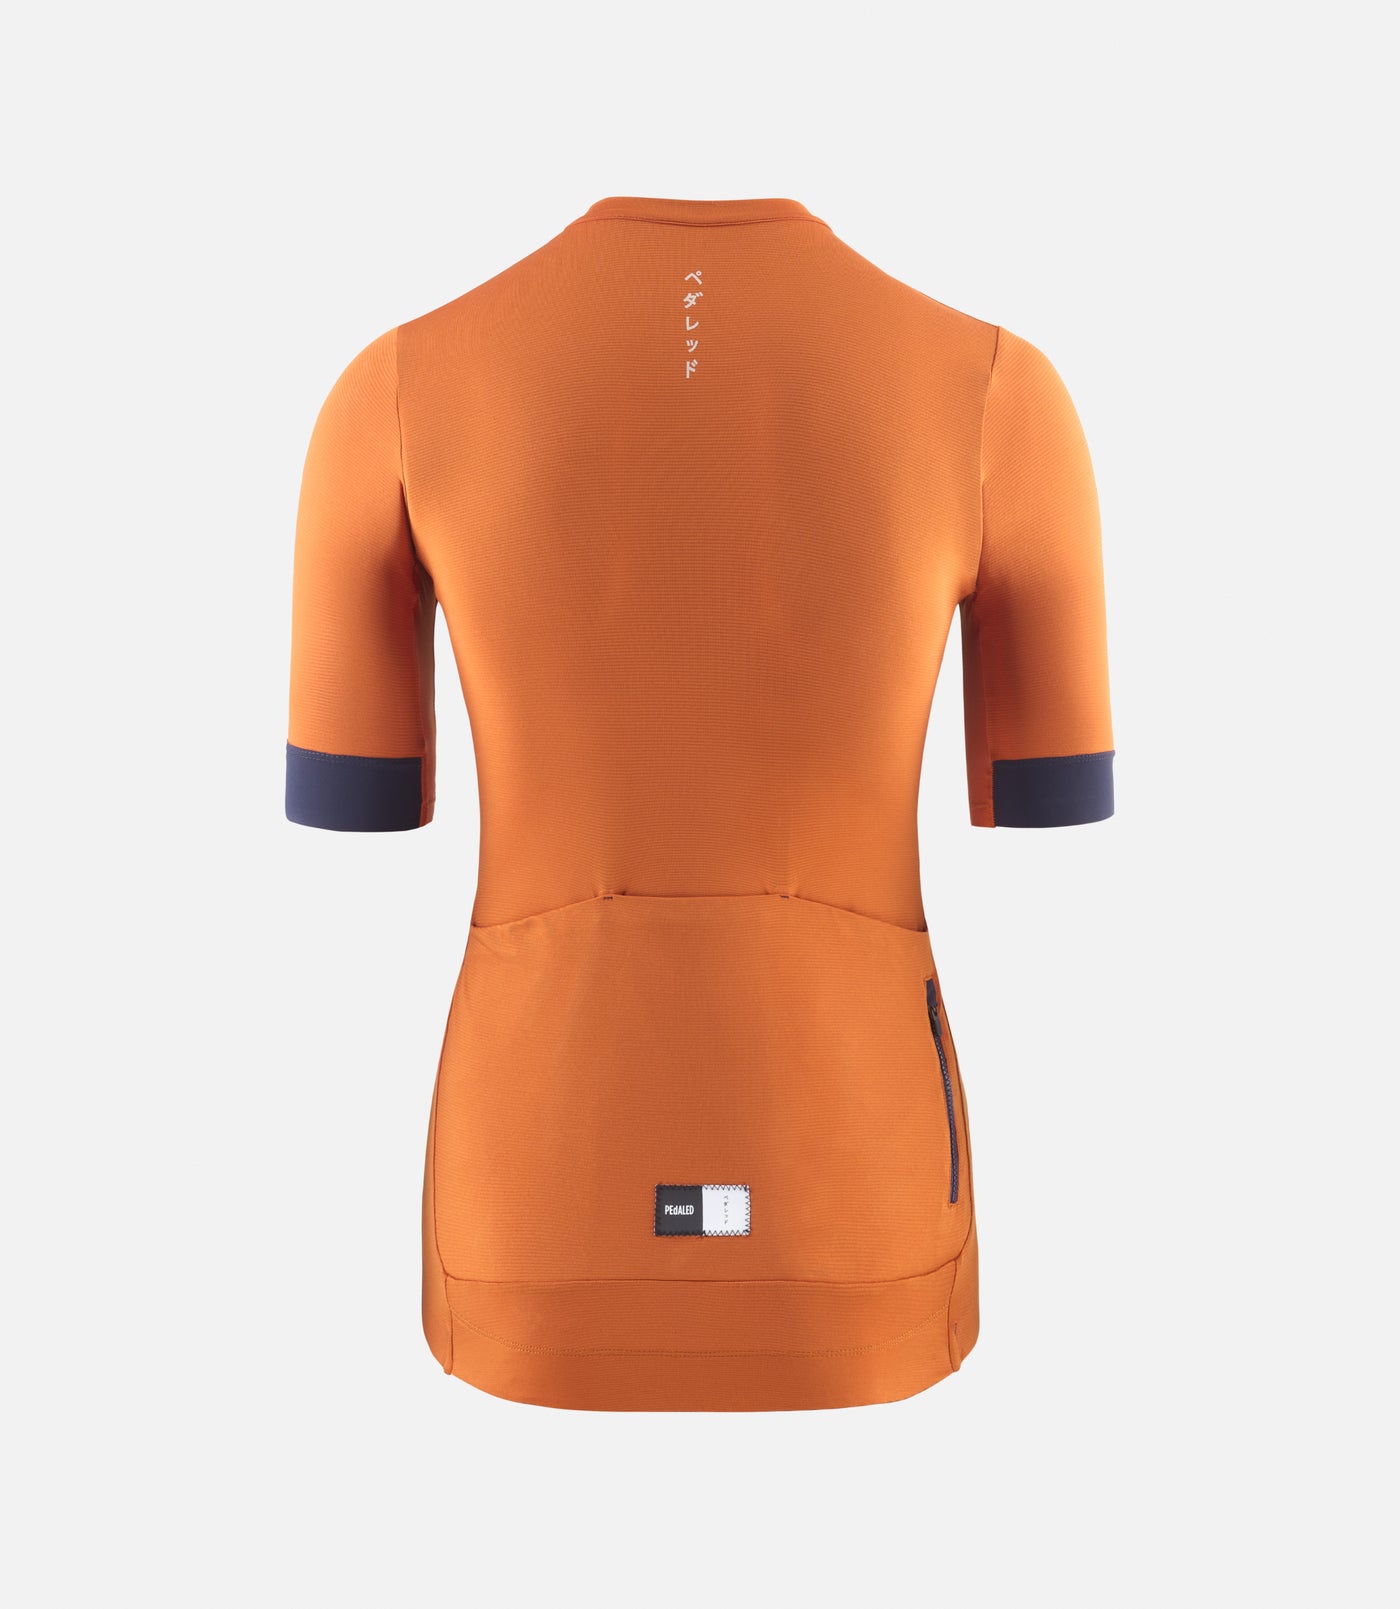 PEdALED Essential Jersey W